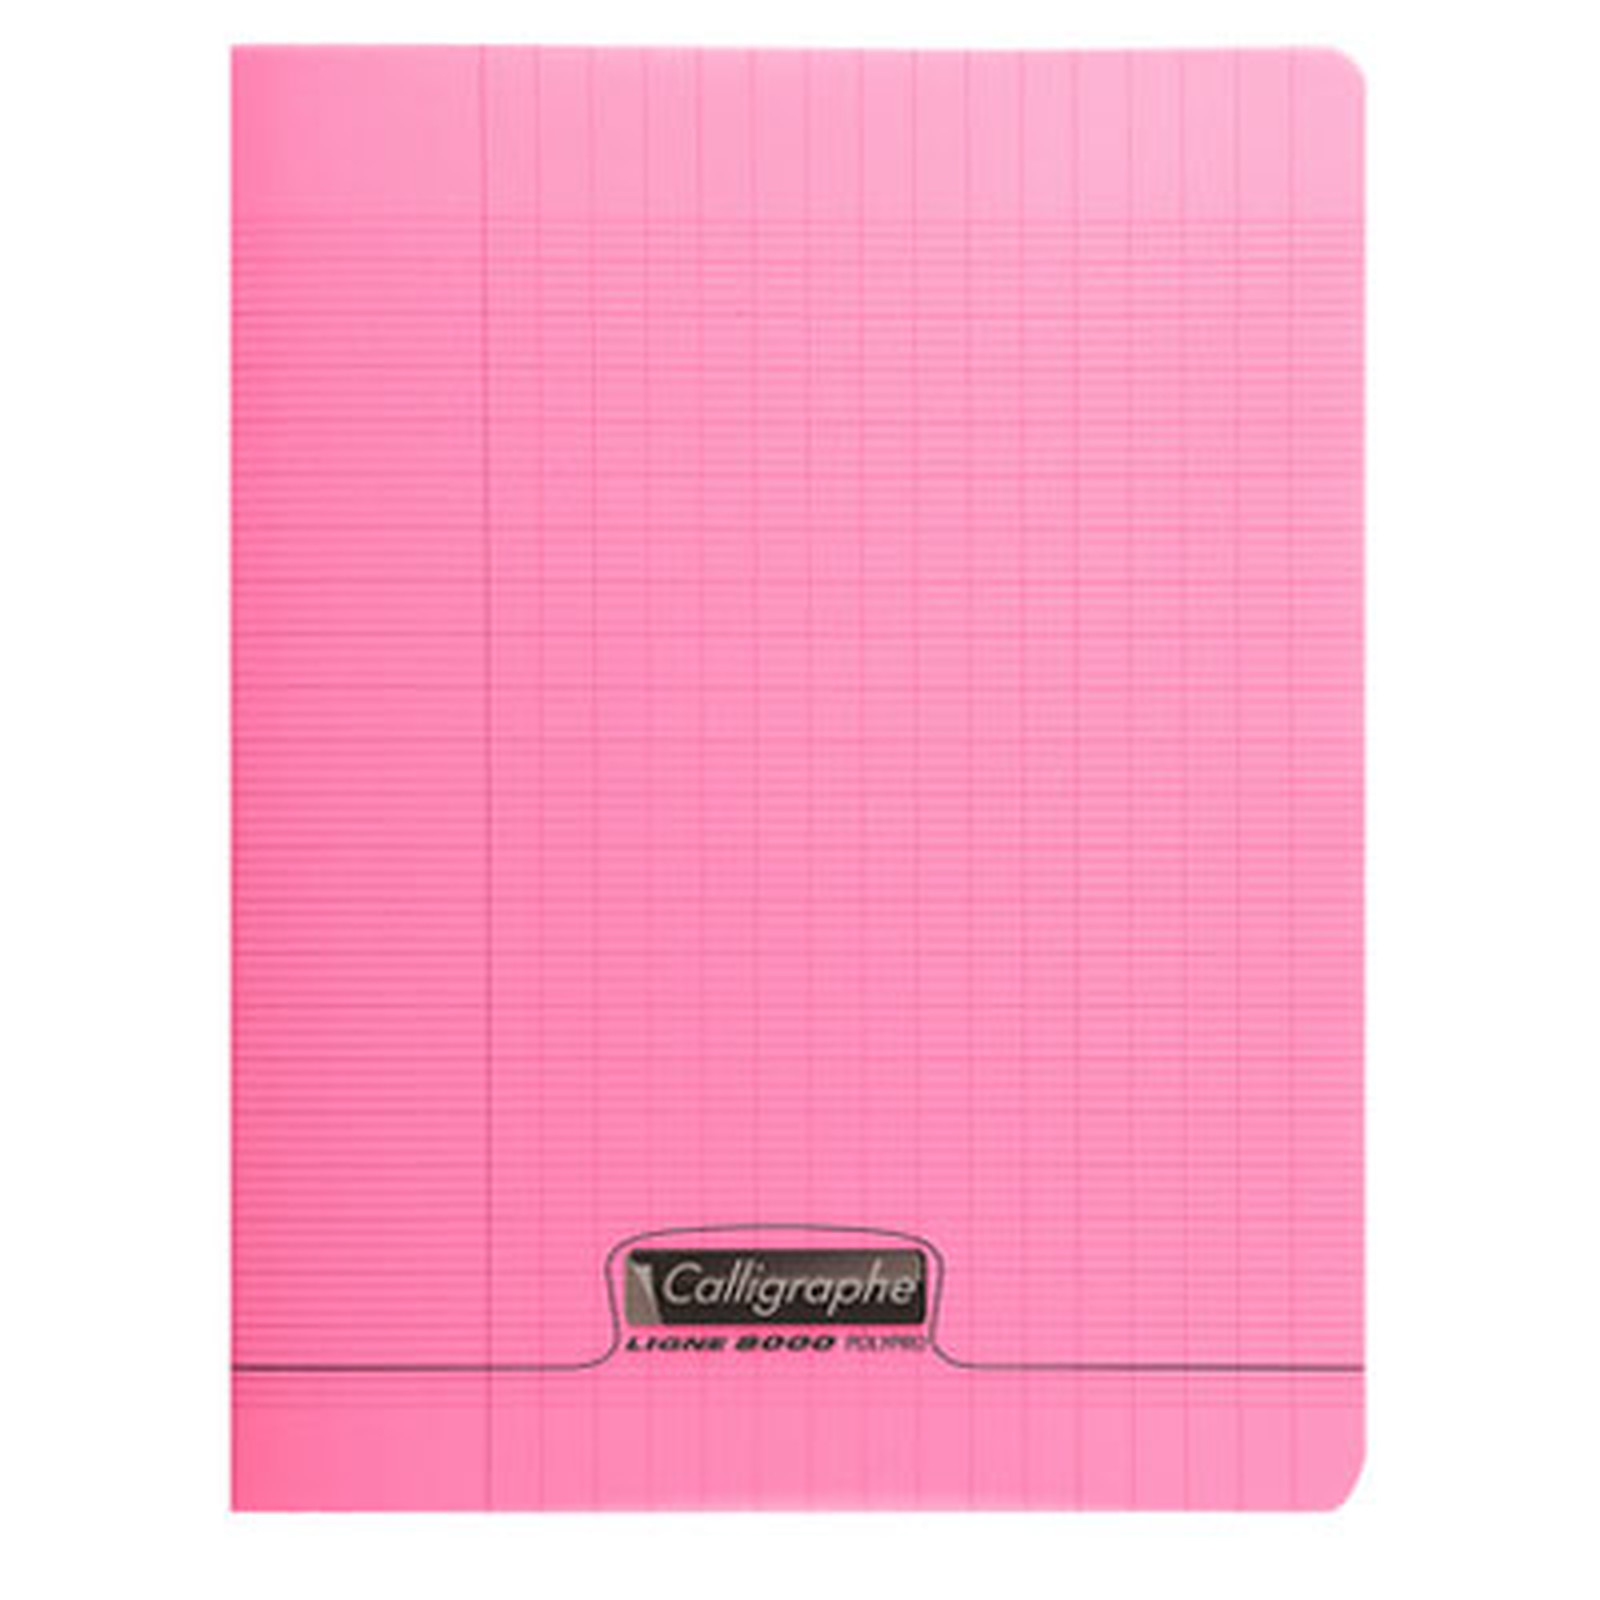 Calligraphe 8000 Polypro Cahier 96 pages 17 x 22 cm seyes grands carreaux Rose - Cahier Calligraphe